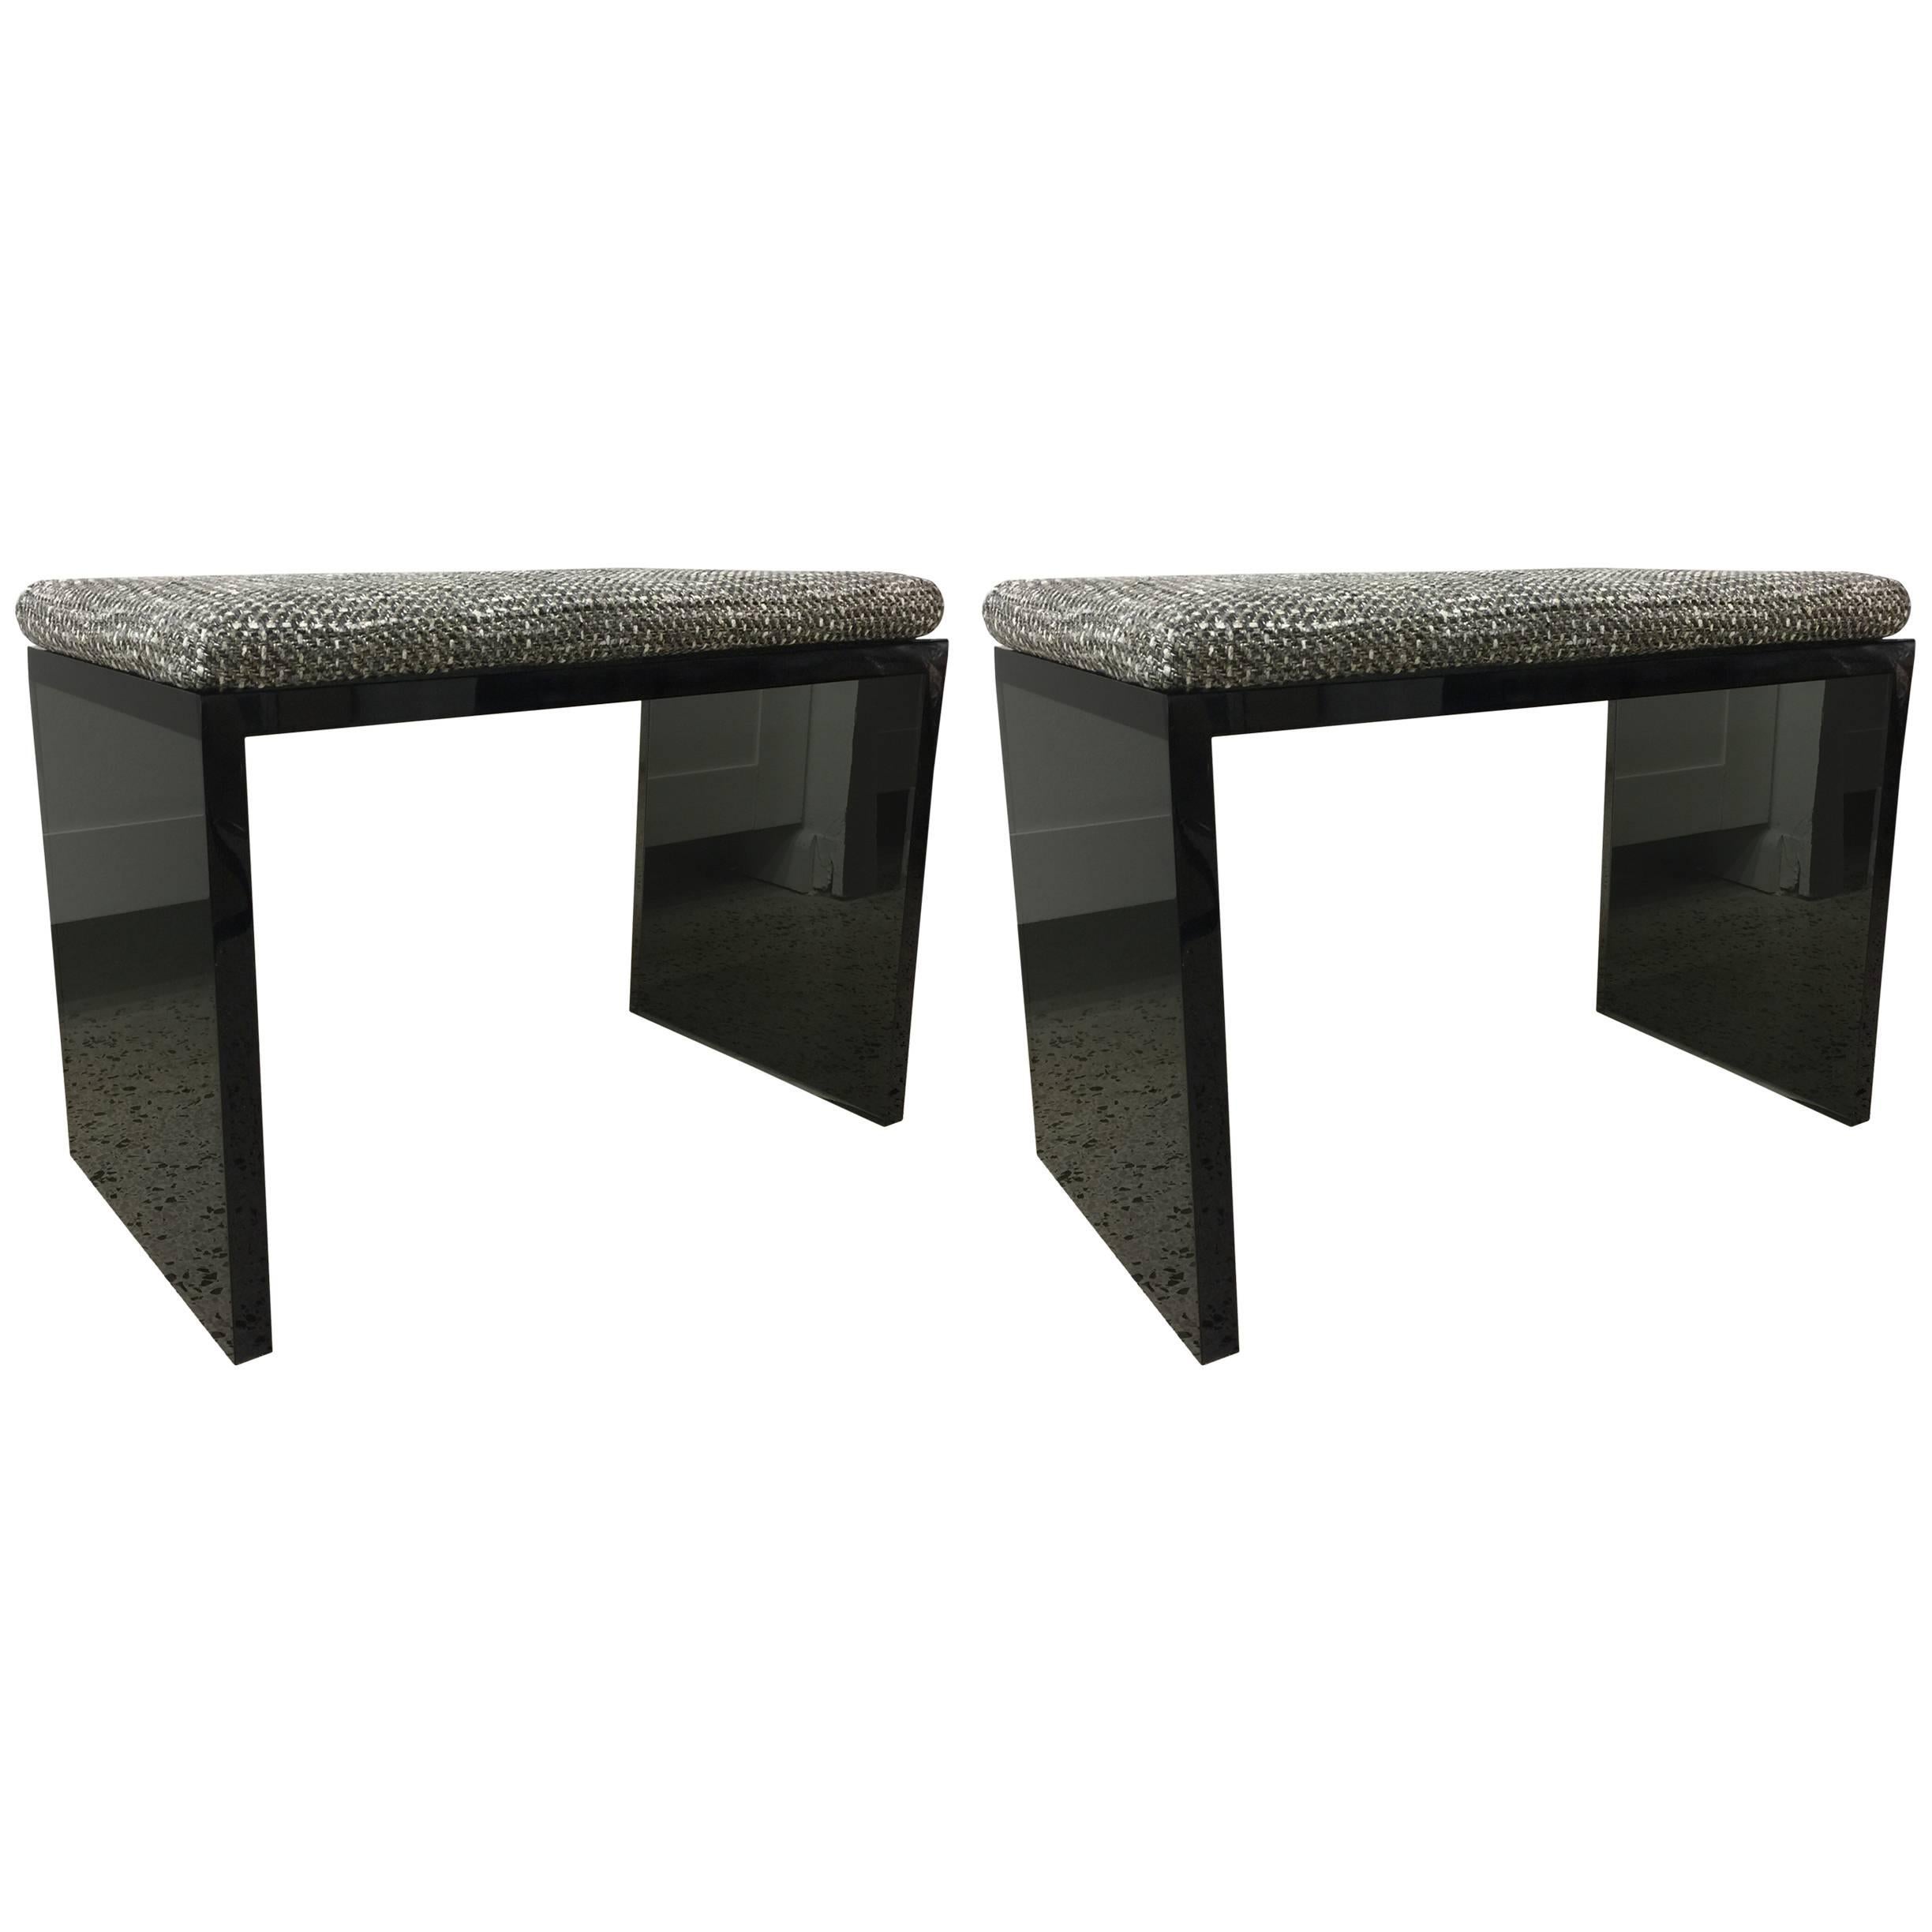 Sleek Grey Smoked Lucite Benches, 2 Available